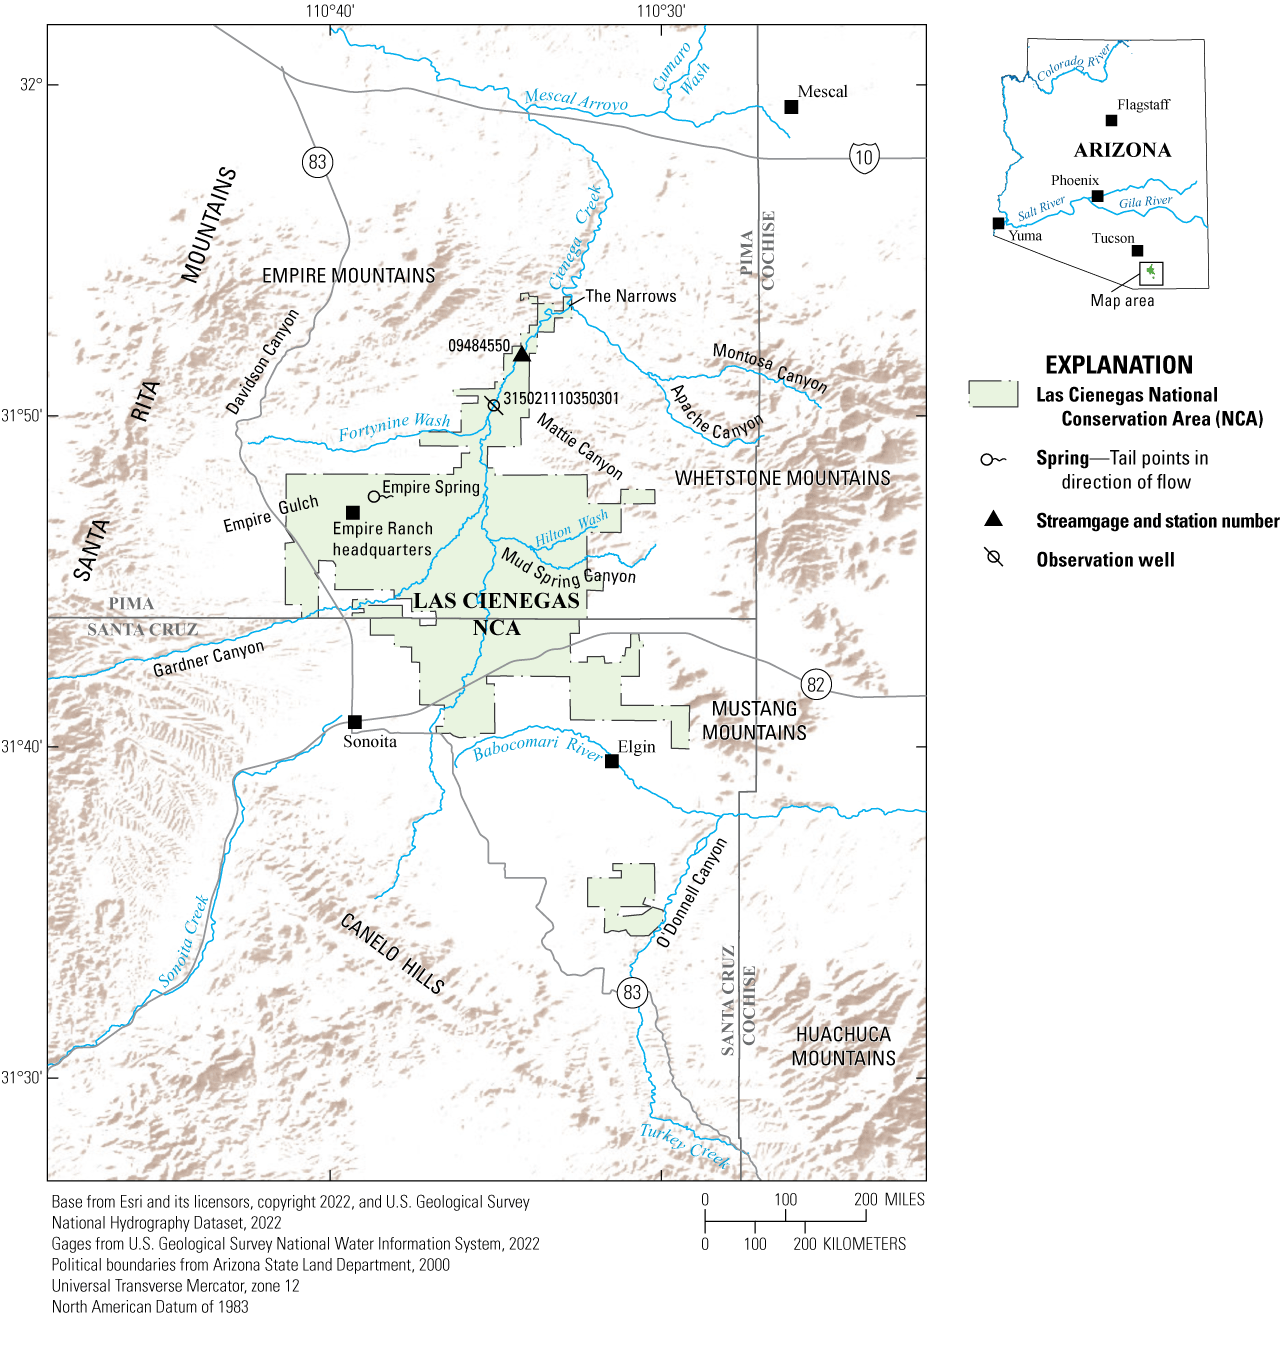 Las Cienegas National Conservation Area spans parts of Pima and Santa Cruz Counties;
                     Cienega Creek vertically bisects the study area.